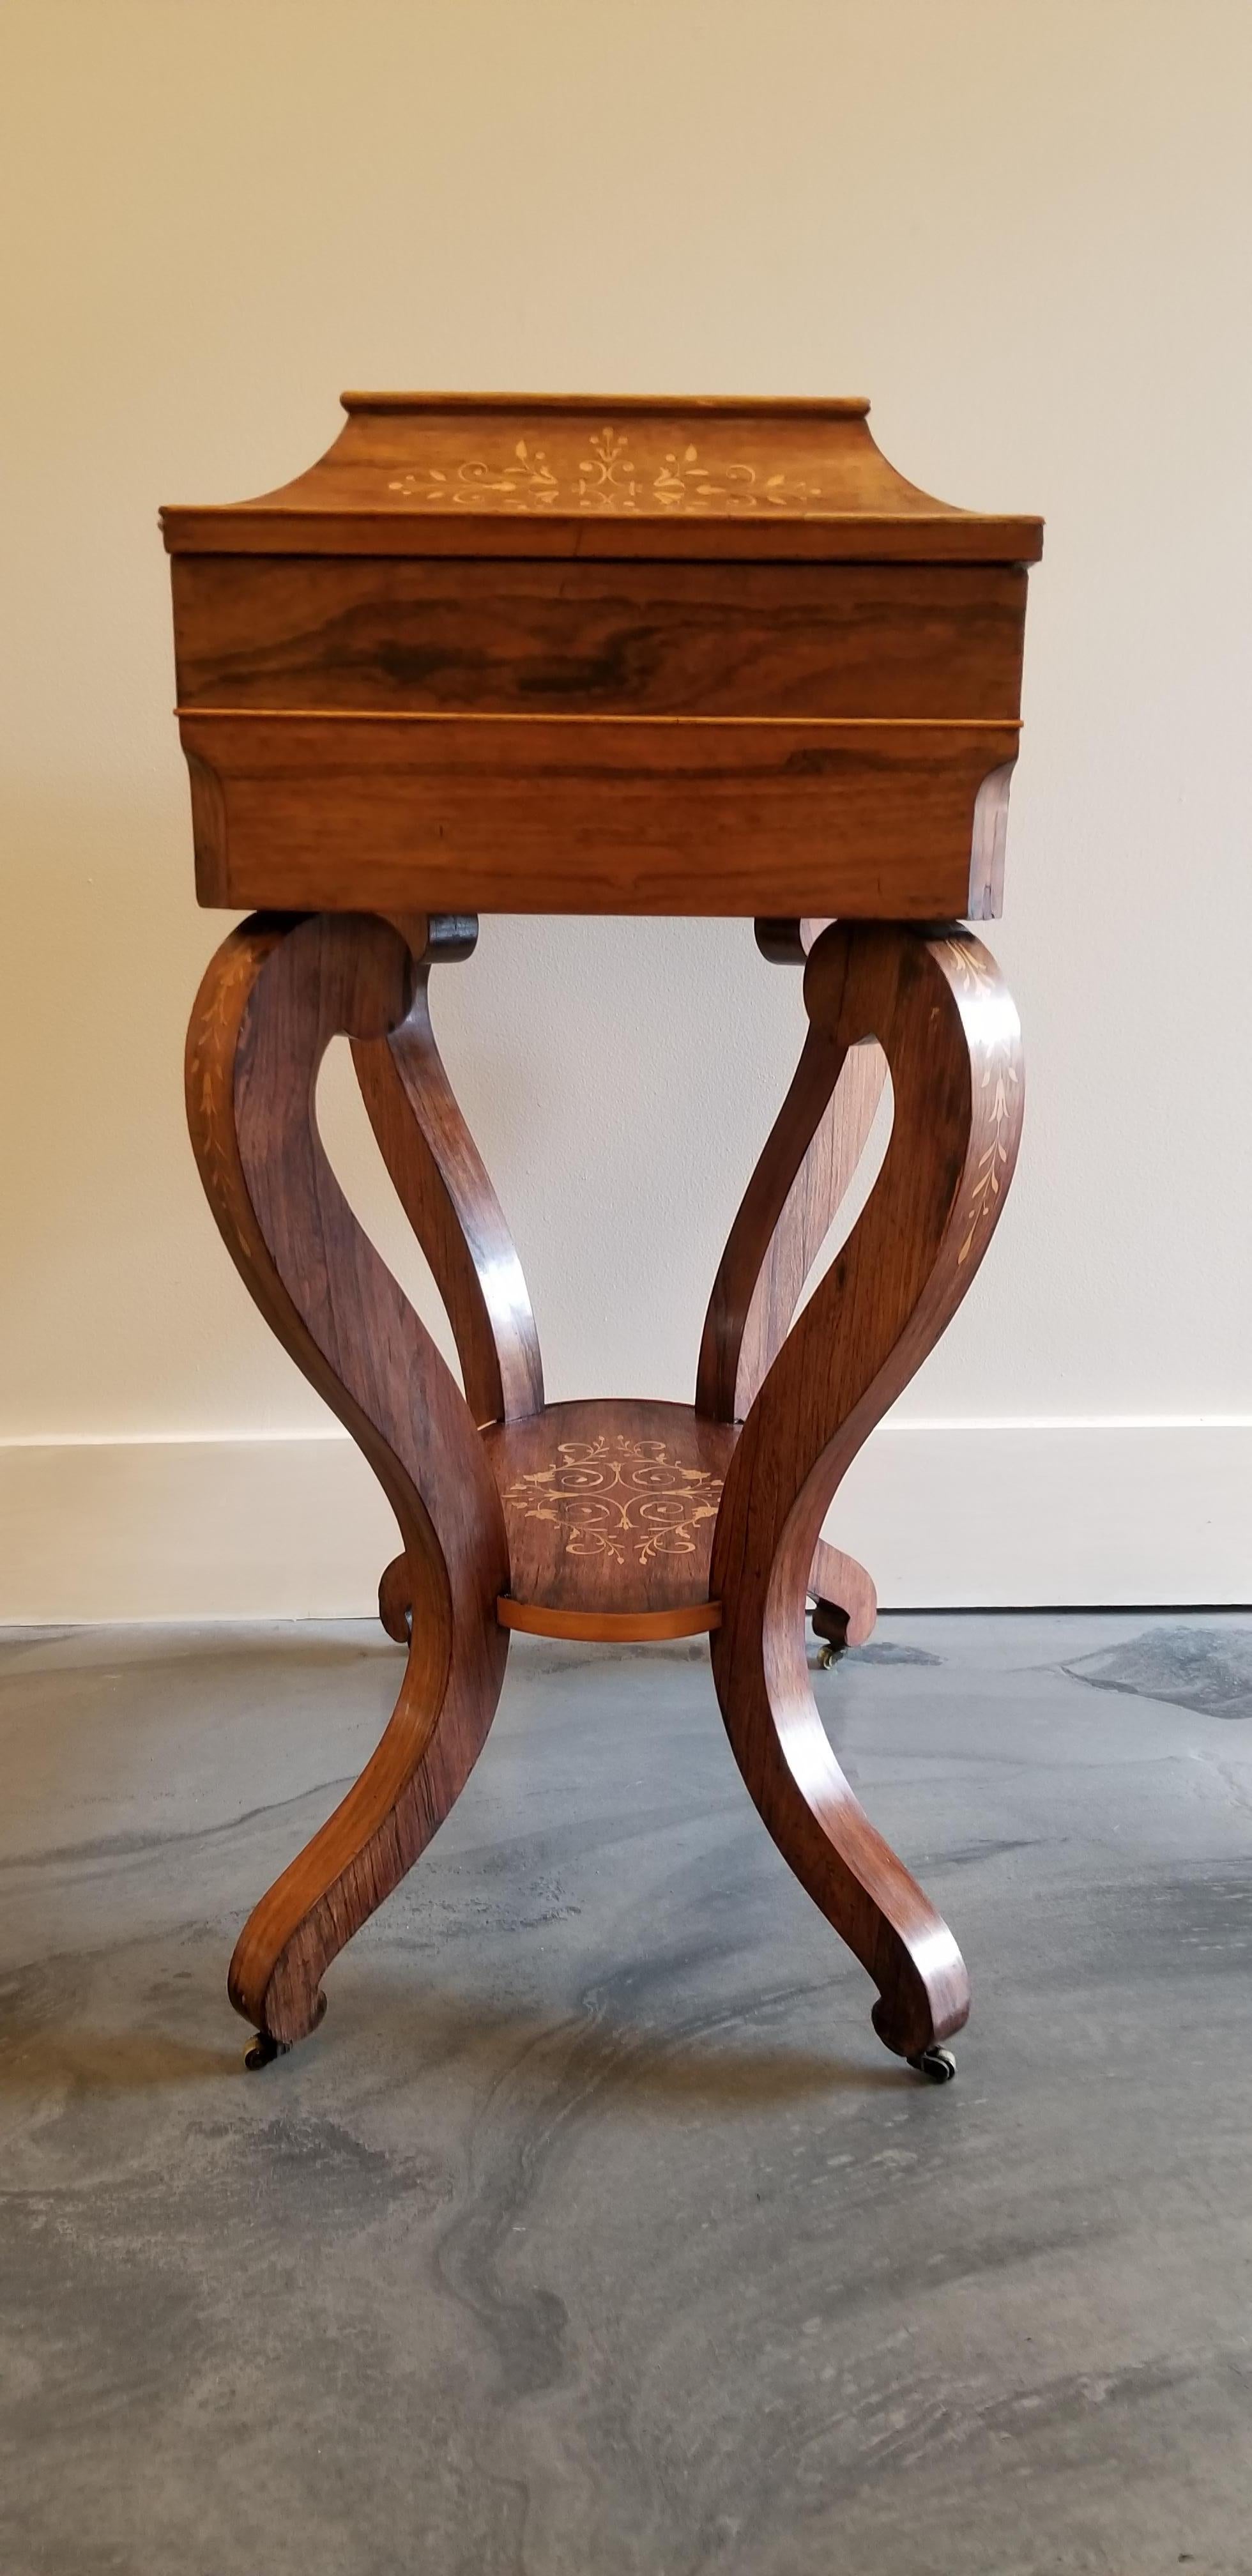 A fine antique rosewood vanity with satinwood marquetry. Mirrored and fitted interior. Retaining original castors, circa 1825.